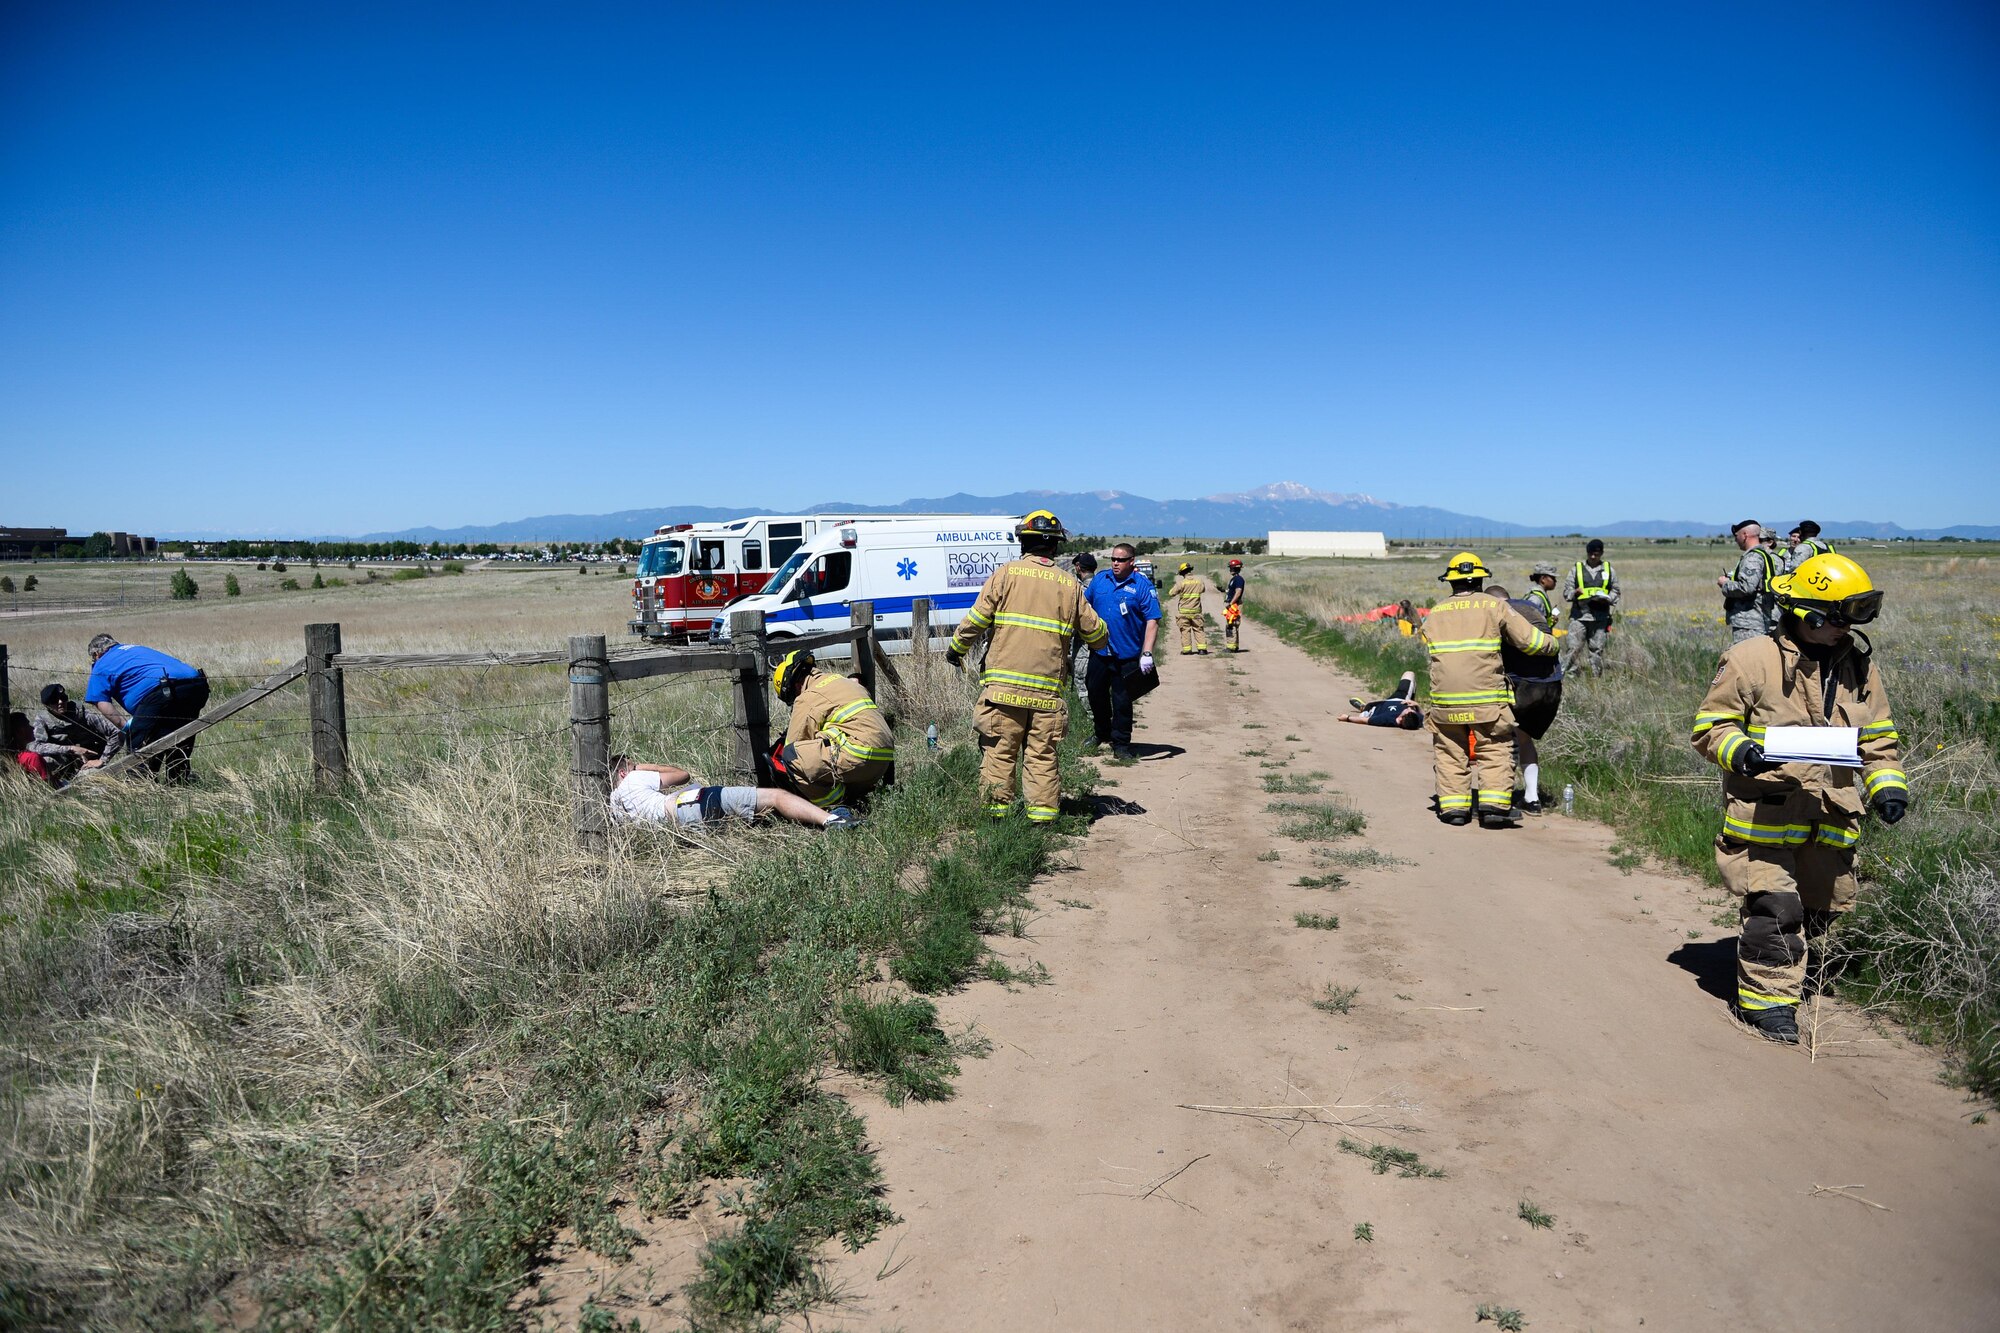 First responders tend to victims and survey the damaged areas during a tornado exercise at Schriever Air Force Base, Colorado, Wednesday, June 15, 2016. The tornado was just one of the scenarios Schriever personnel responded to during the base-wide exercise June 6 – 16. (U.S. Air Force photo/Christopher DeWitt)